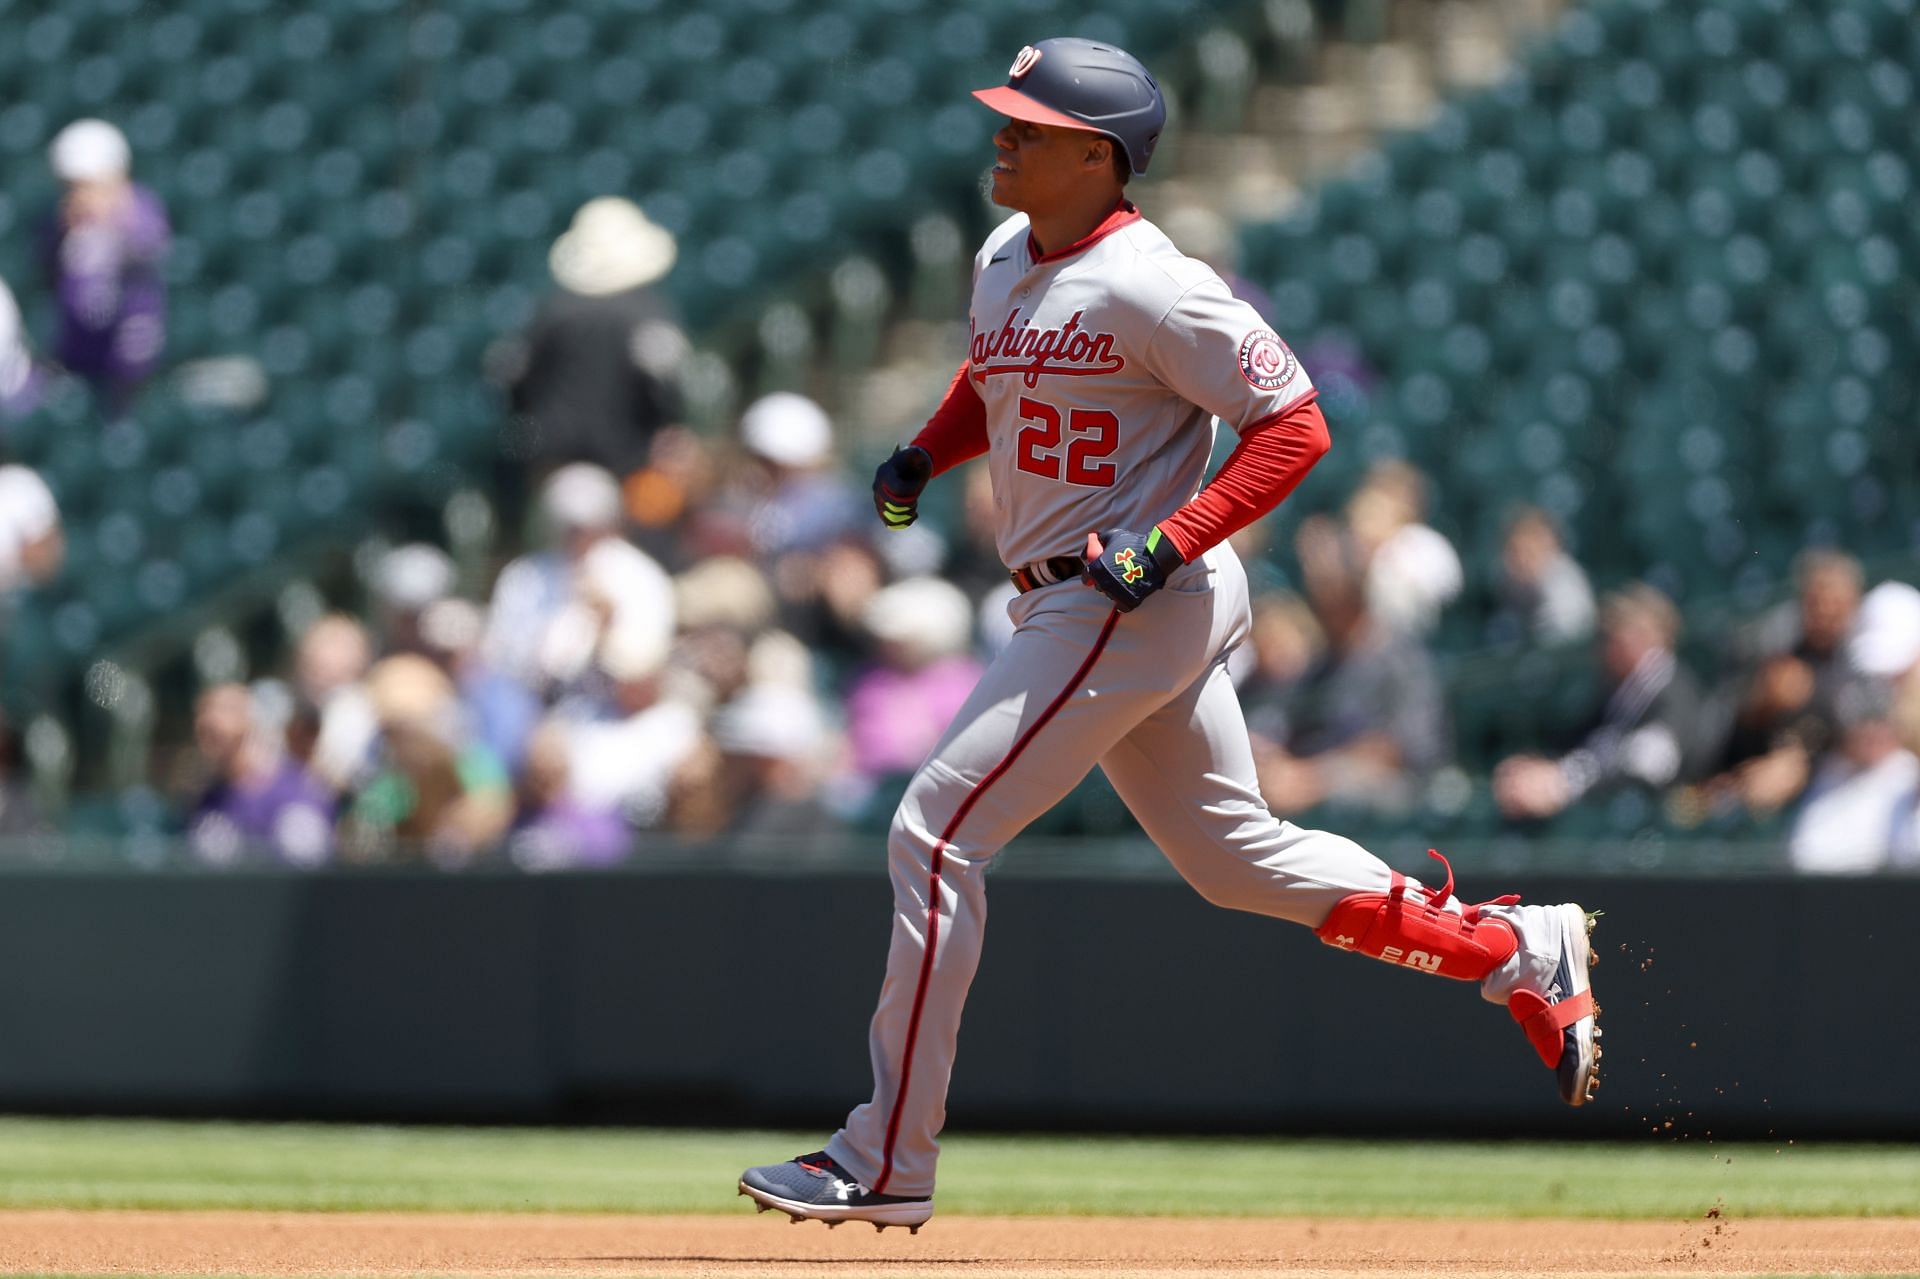 Juan Soto trots the bases after he belted a home run during a Washington Nationals v Colorado Rockies game.